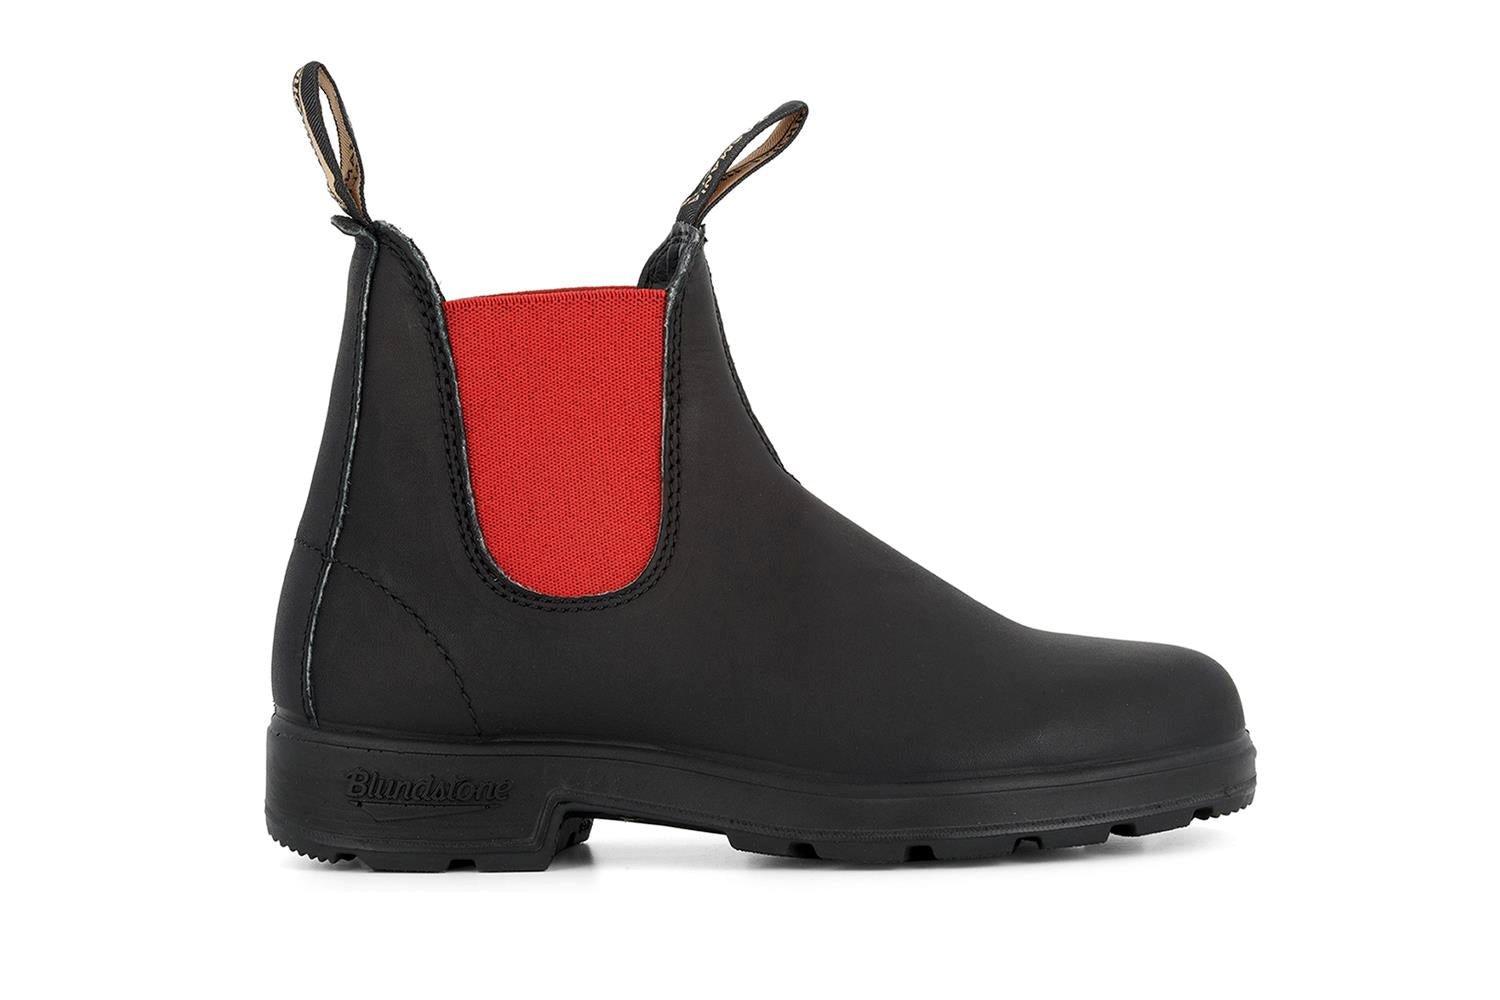 Blundstone #508 Red Chelsea Boot